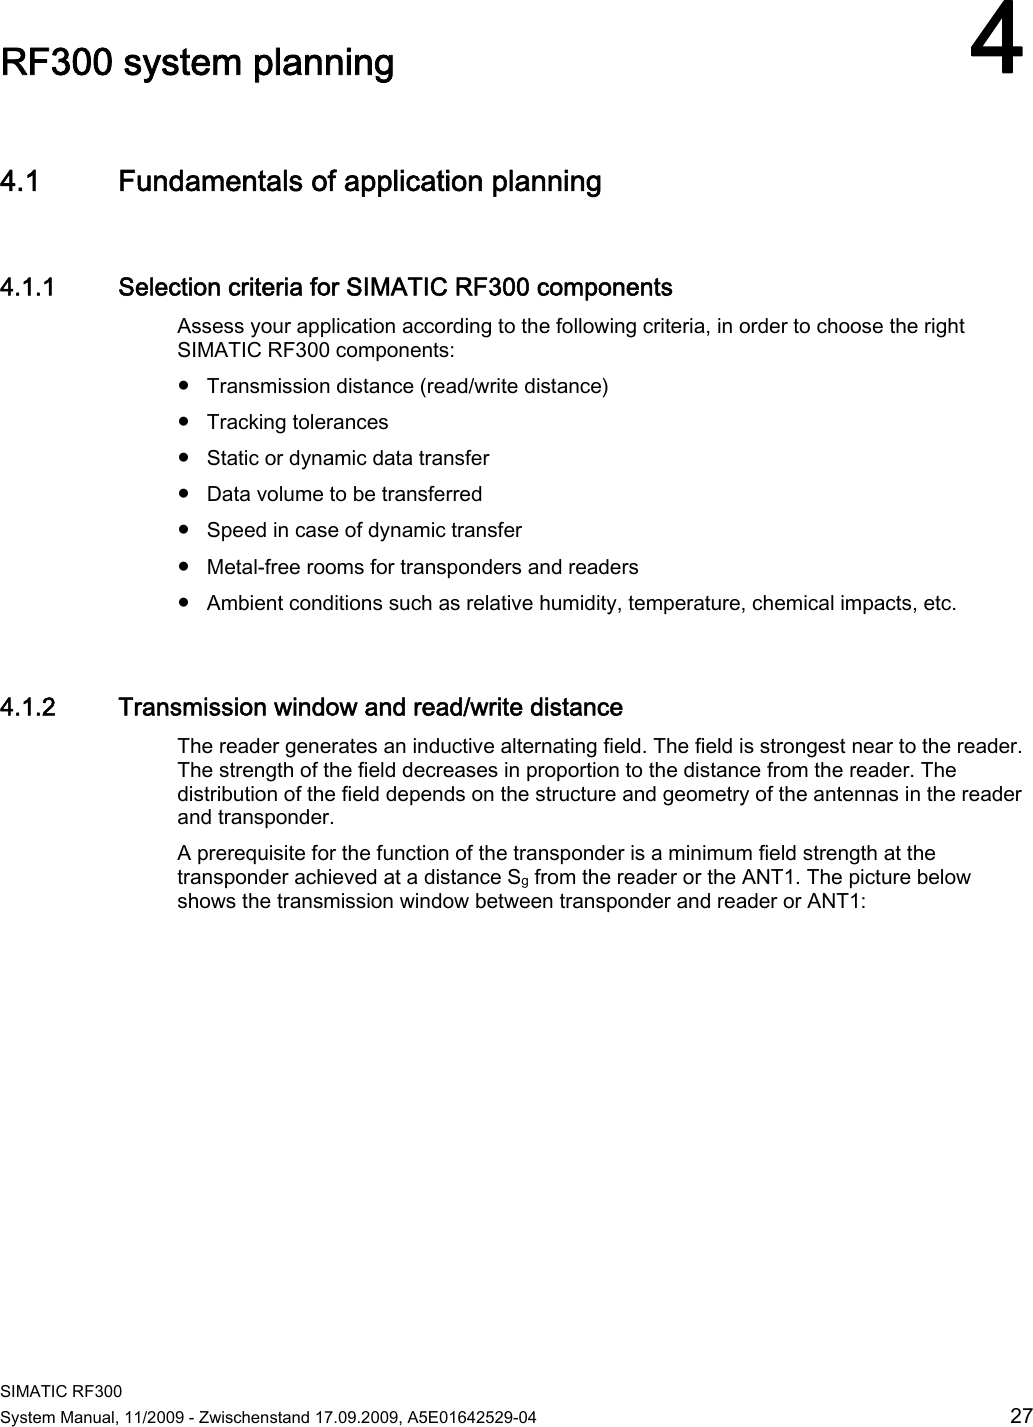  SIMATIC RF300 System Manual, 11/2009 - Zwischenstand 17.09.2009, A5E01642529-04  27 RF300 system planning 44.1 Fundamentals of application planning 4.1.1 Selection criteria for SIMATIC RF300 components Assess your application according to the following criteria, in order to choose the right SIMATIC RF300 components:  ● Transmission distance (read/write distance) ● Tracking tolerances ● Static or dynamic data transfer ● Data volume to be transferred ● Speed in case of dynamic transfer ● Metal-free rooms for transponders and readers ● Ambient conditions such as relative humidity, temperature, chemical impacts, etc. 4.1.2 Transmission window and read/write distance The reader generates an inductive alternating field. The field is strongest near to the reader. The strength of the field decreases in proportion to the distance from the reader. The distribution of the field depends on the structure and geometry of the antennas in the reader and transponder.  A prerequisite for the function of the transponder is a minimum field strength at the transponder achieved at a distance Sg from the reader or the ANT1. The picture below shows the transmission window between transponder and reader or ANT1: 